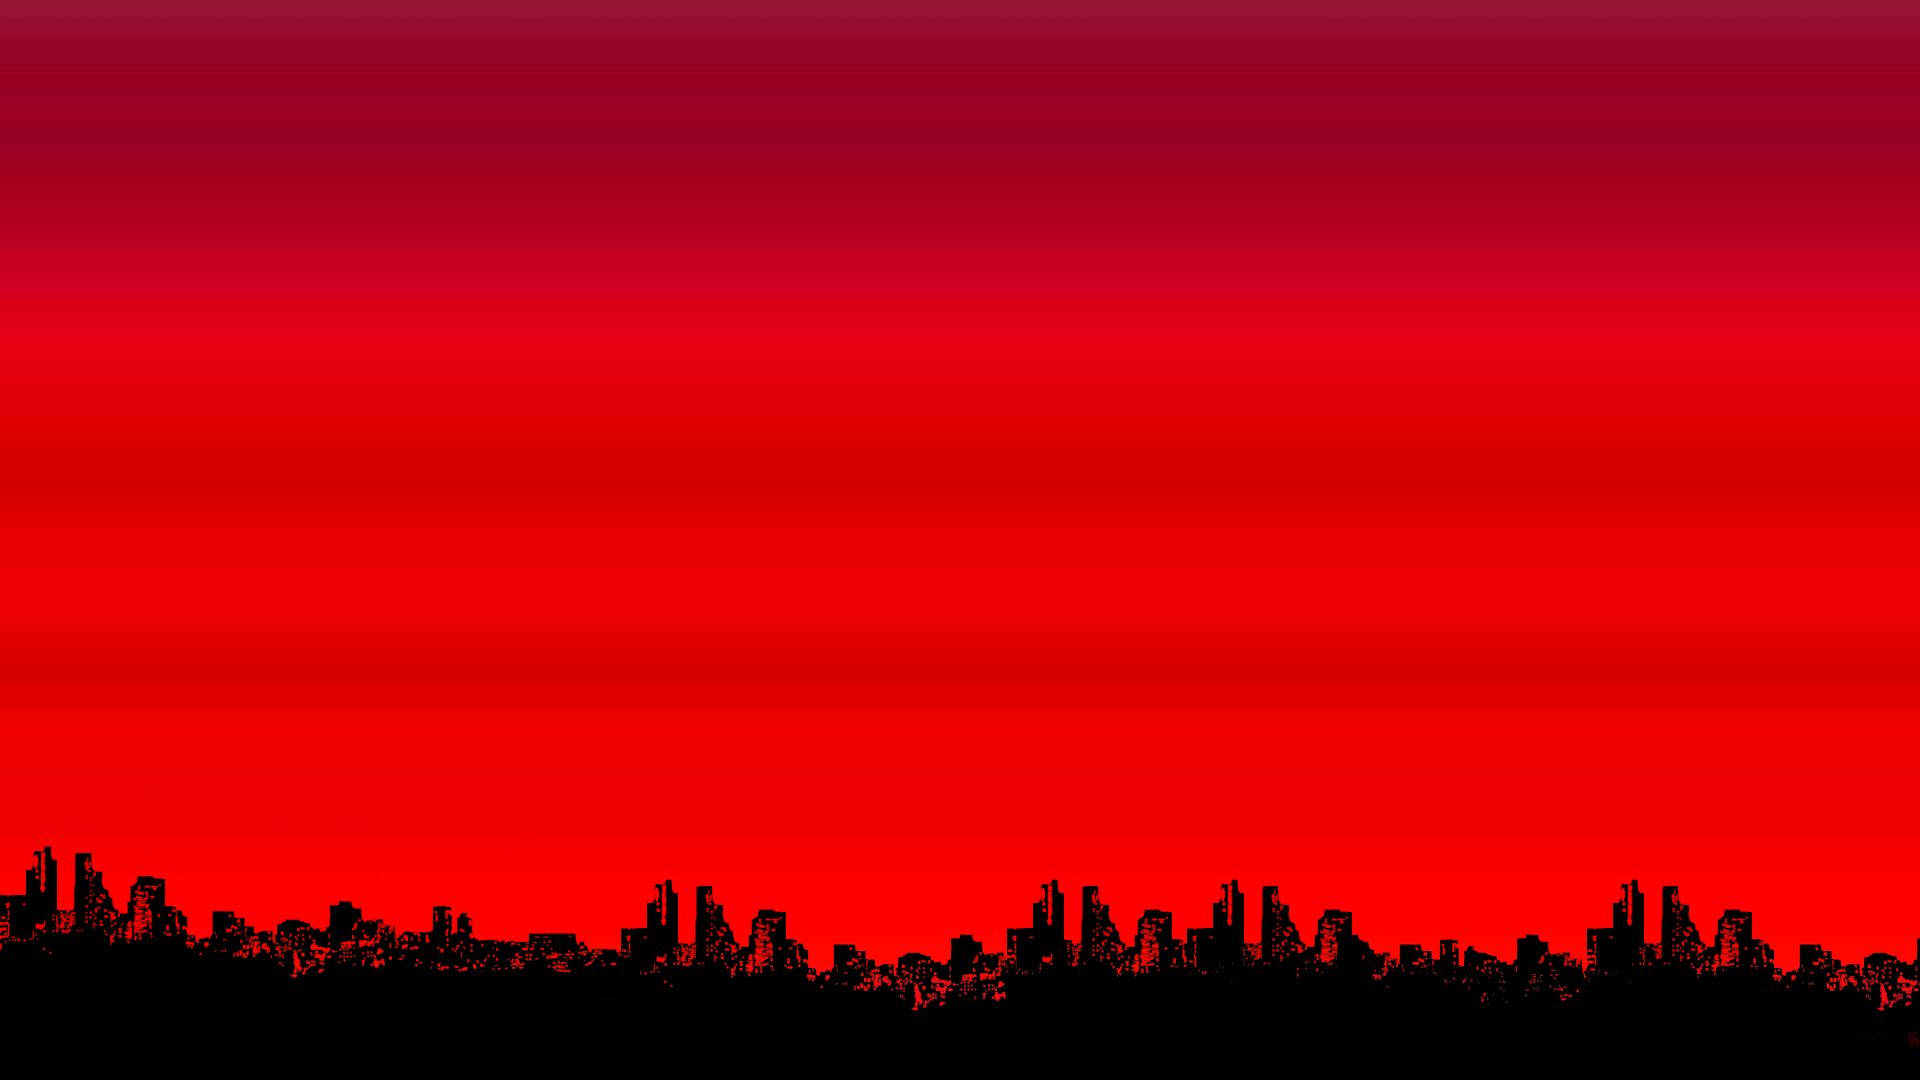 Skyline of a City Bathed in a Glowing Red Wallpaper